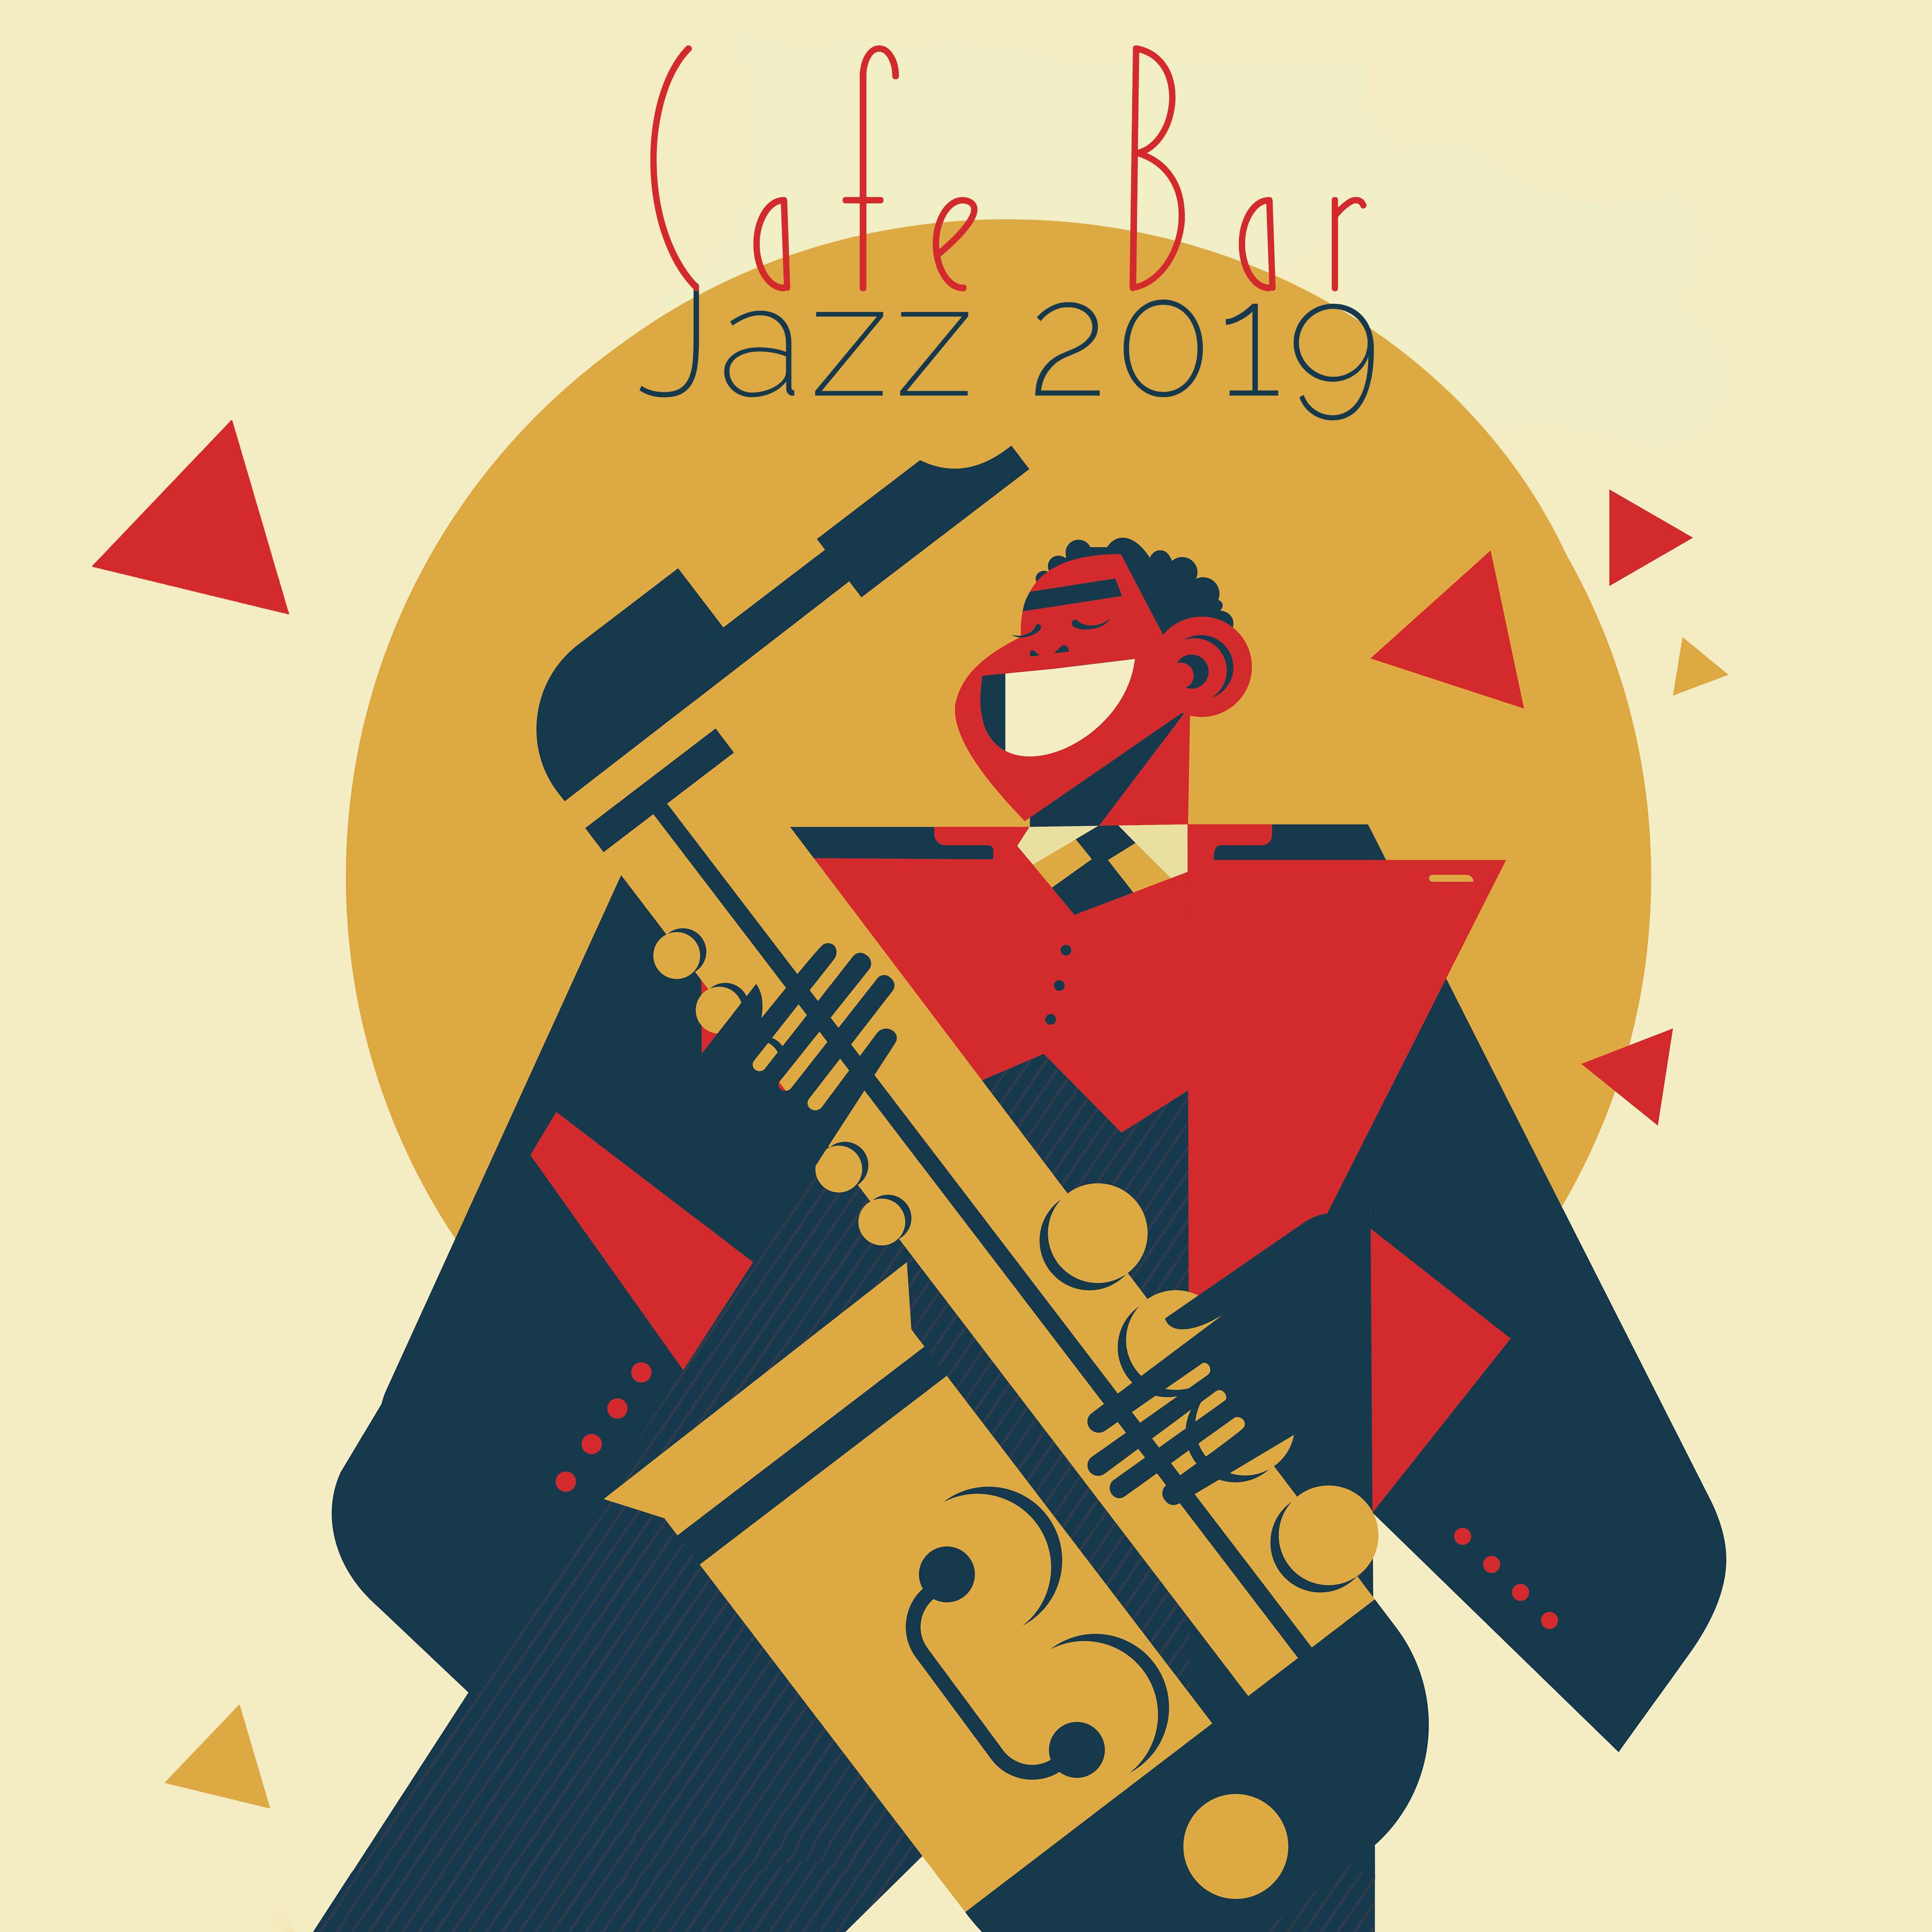 Cafe Bar Jazz 2019: 15 Smooth Jazz Instrumental Tracks for Restaurant, Cafe, Dinner with Friends, Music to Rest